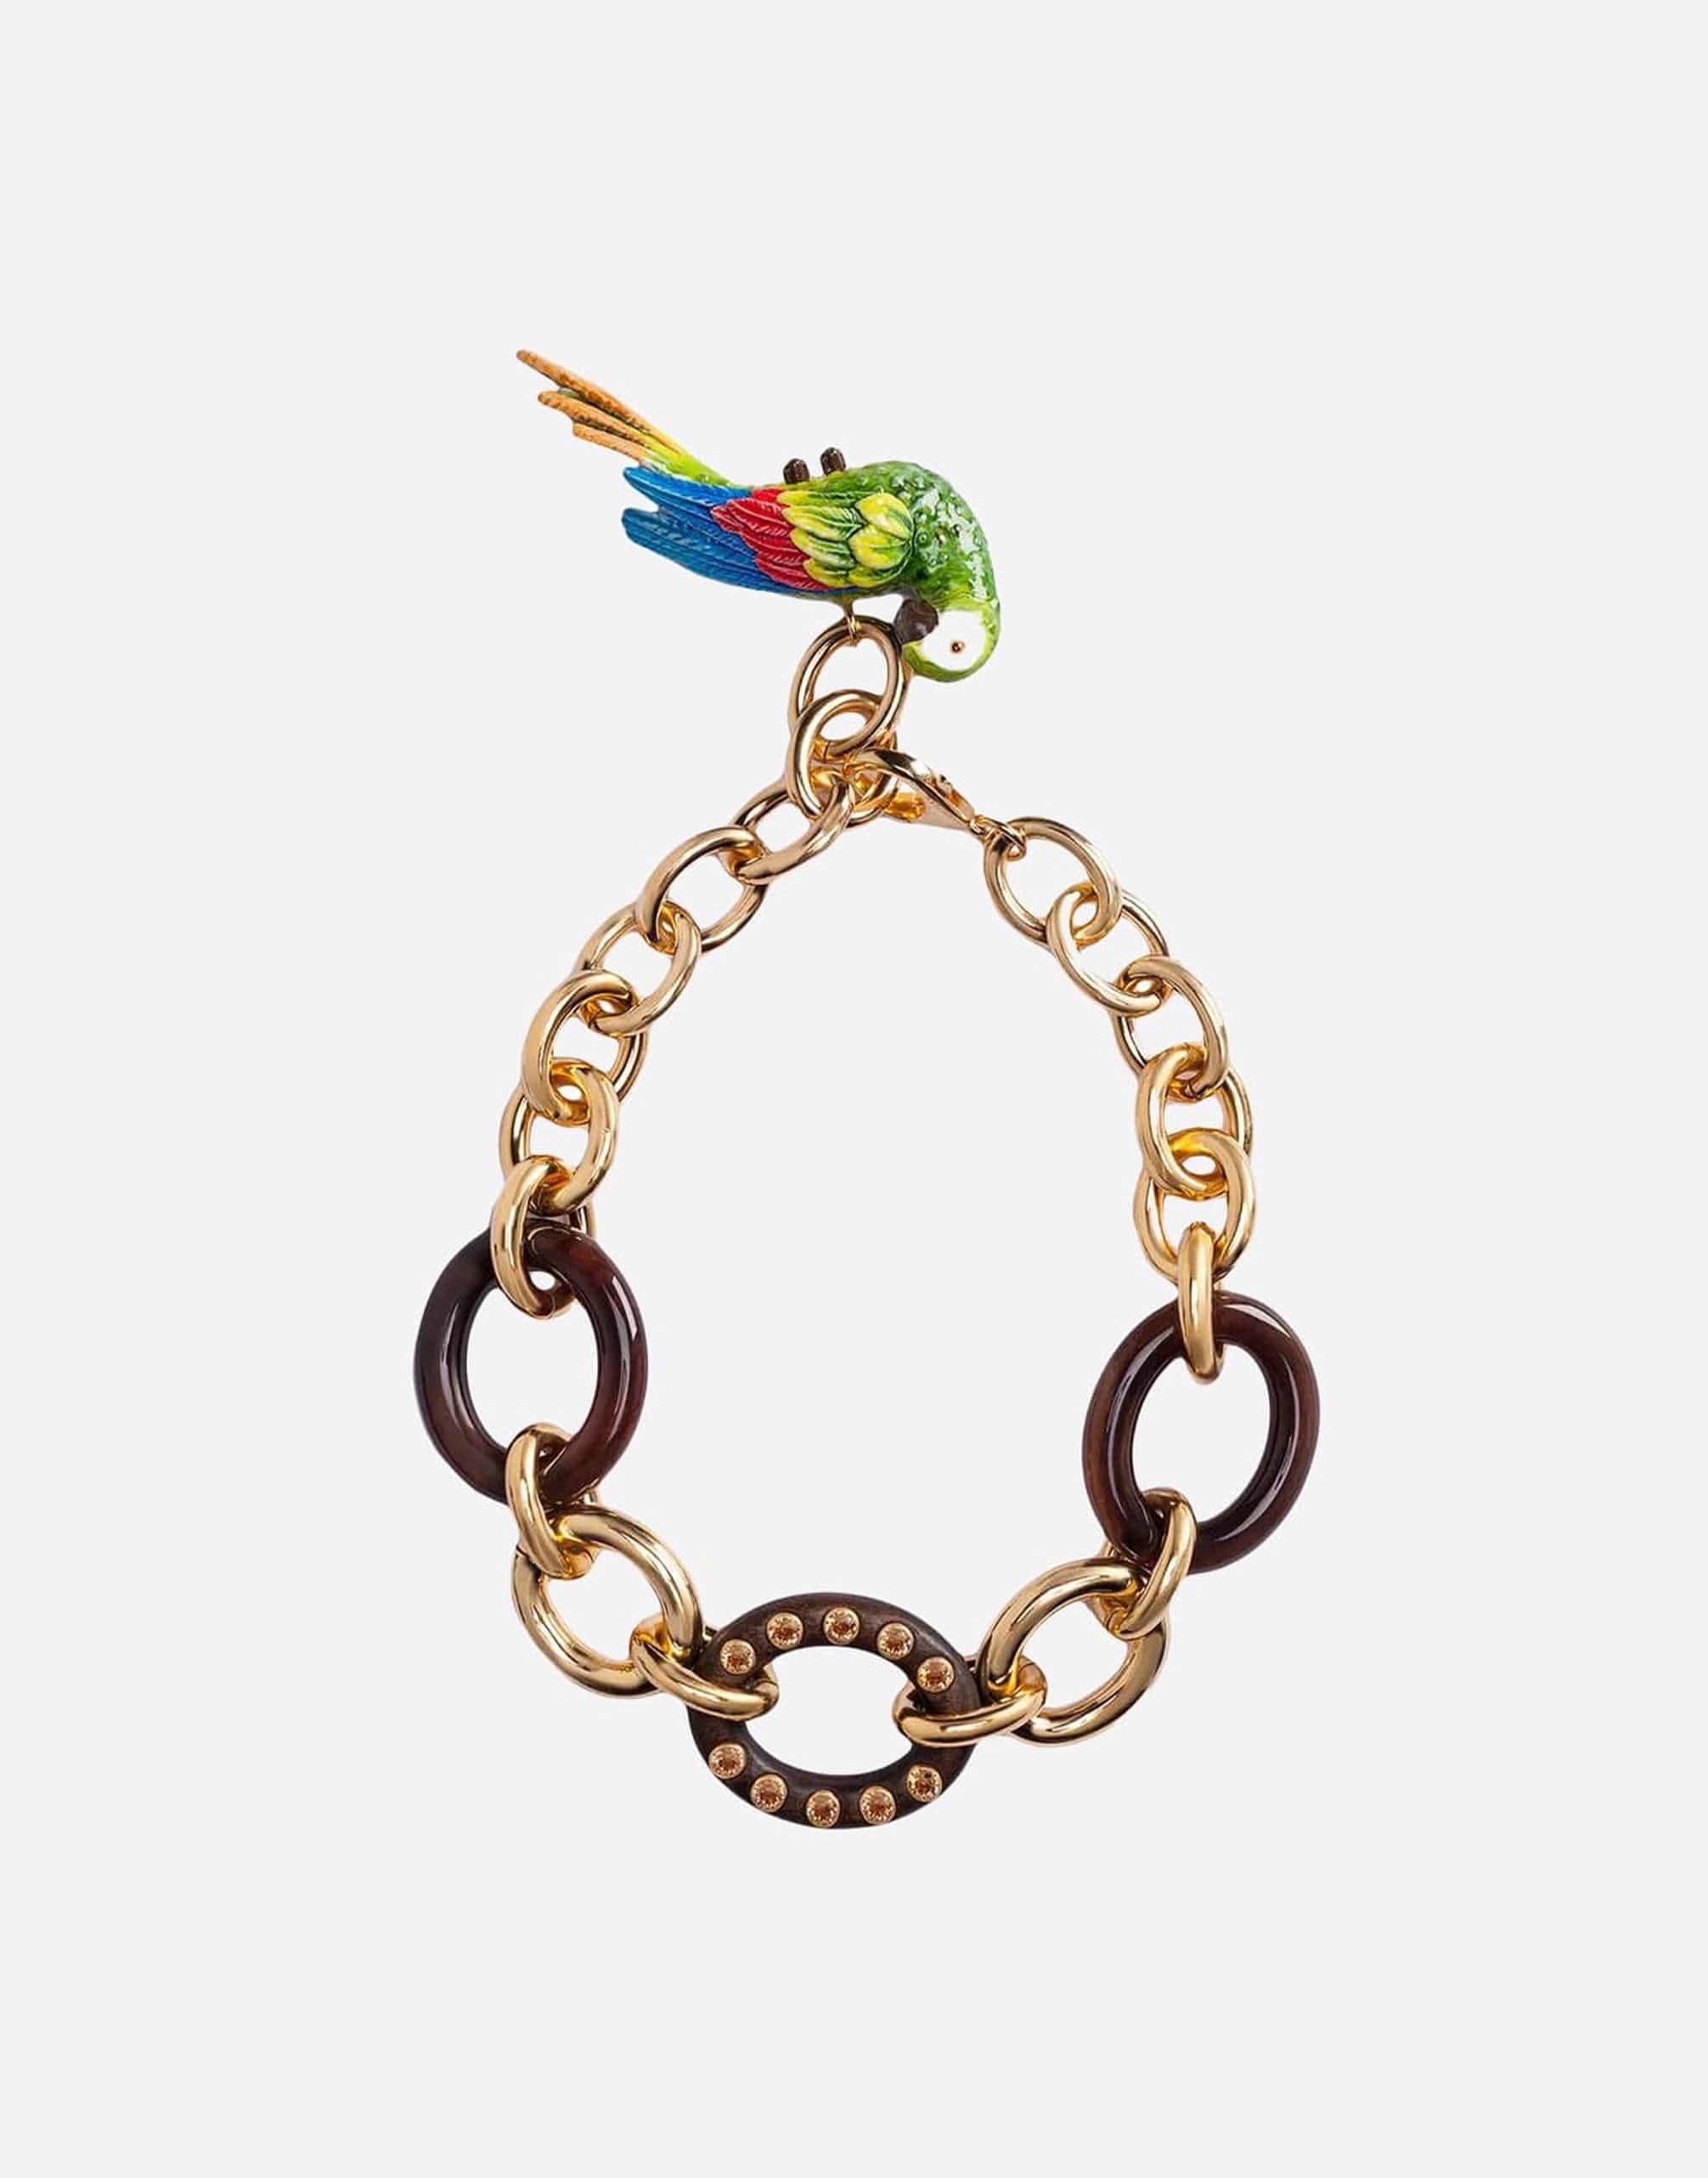 Dolce & Gabbana Parrot Link-Chain Necklace